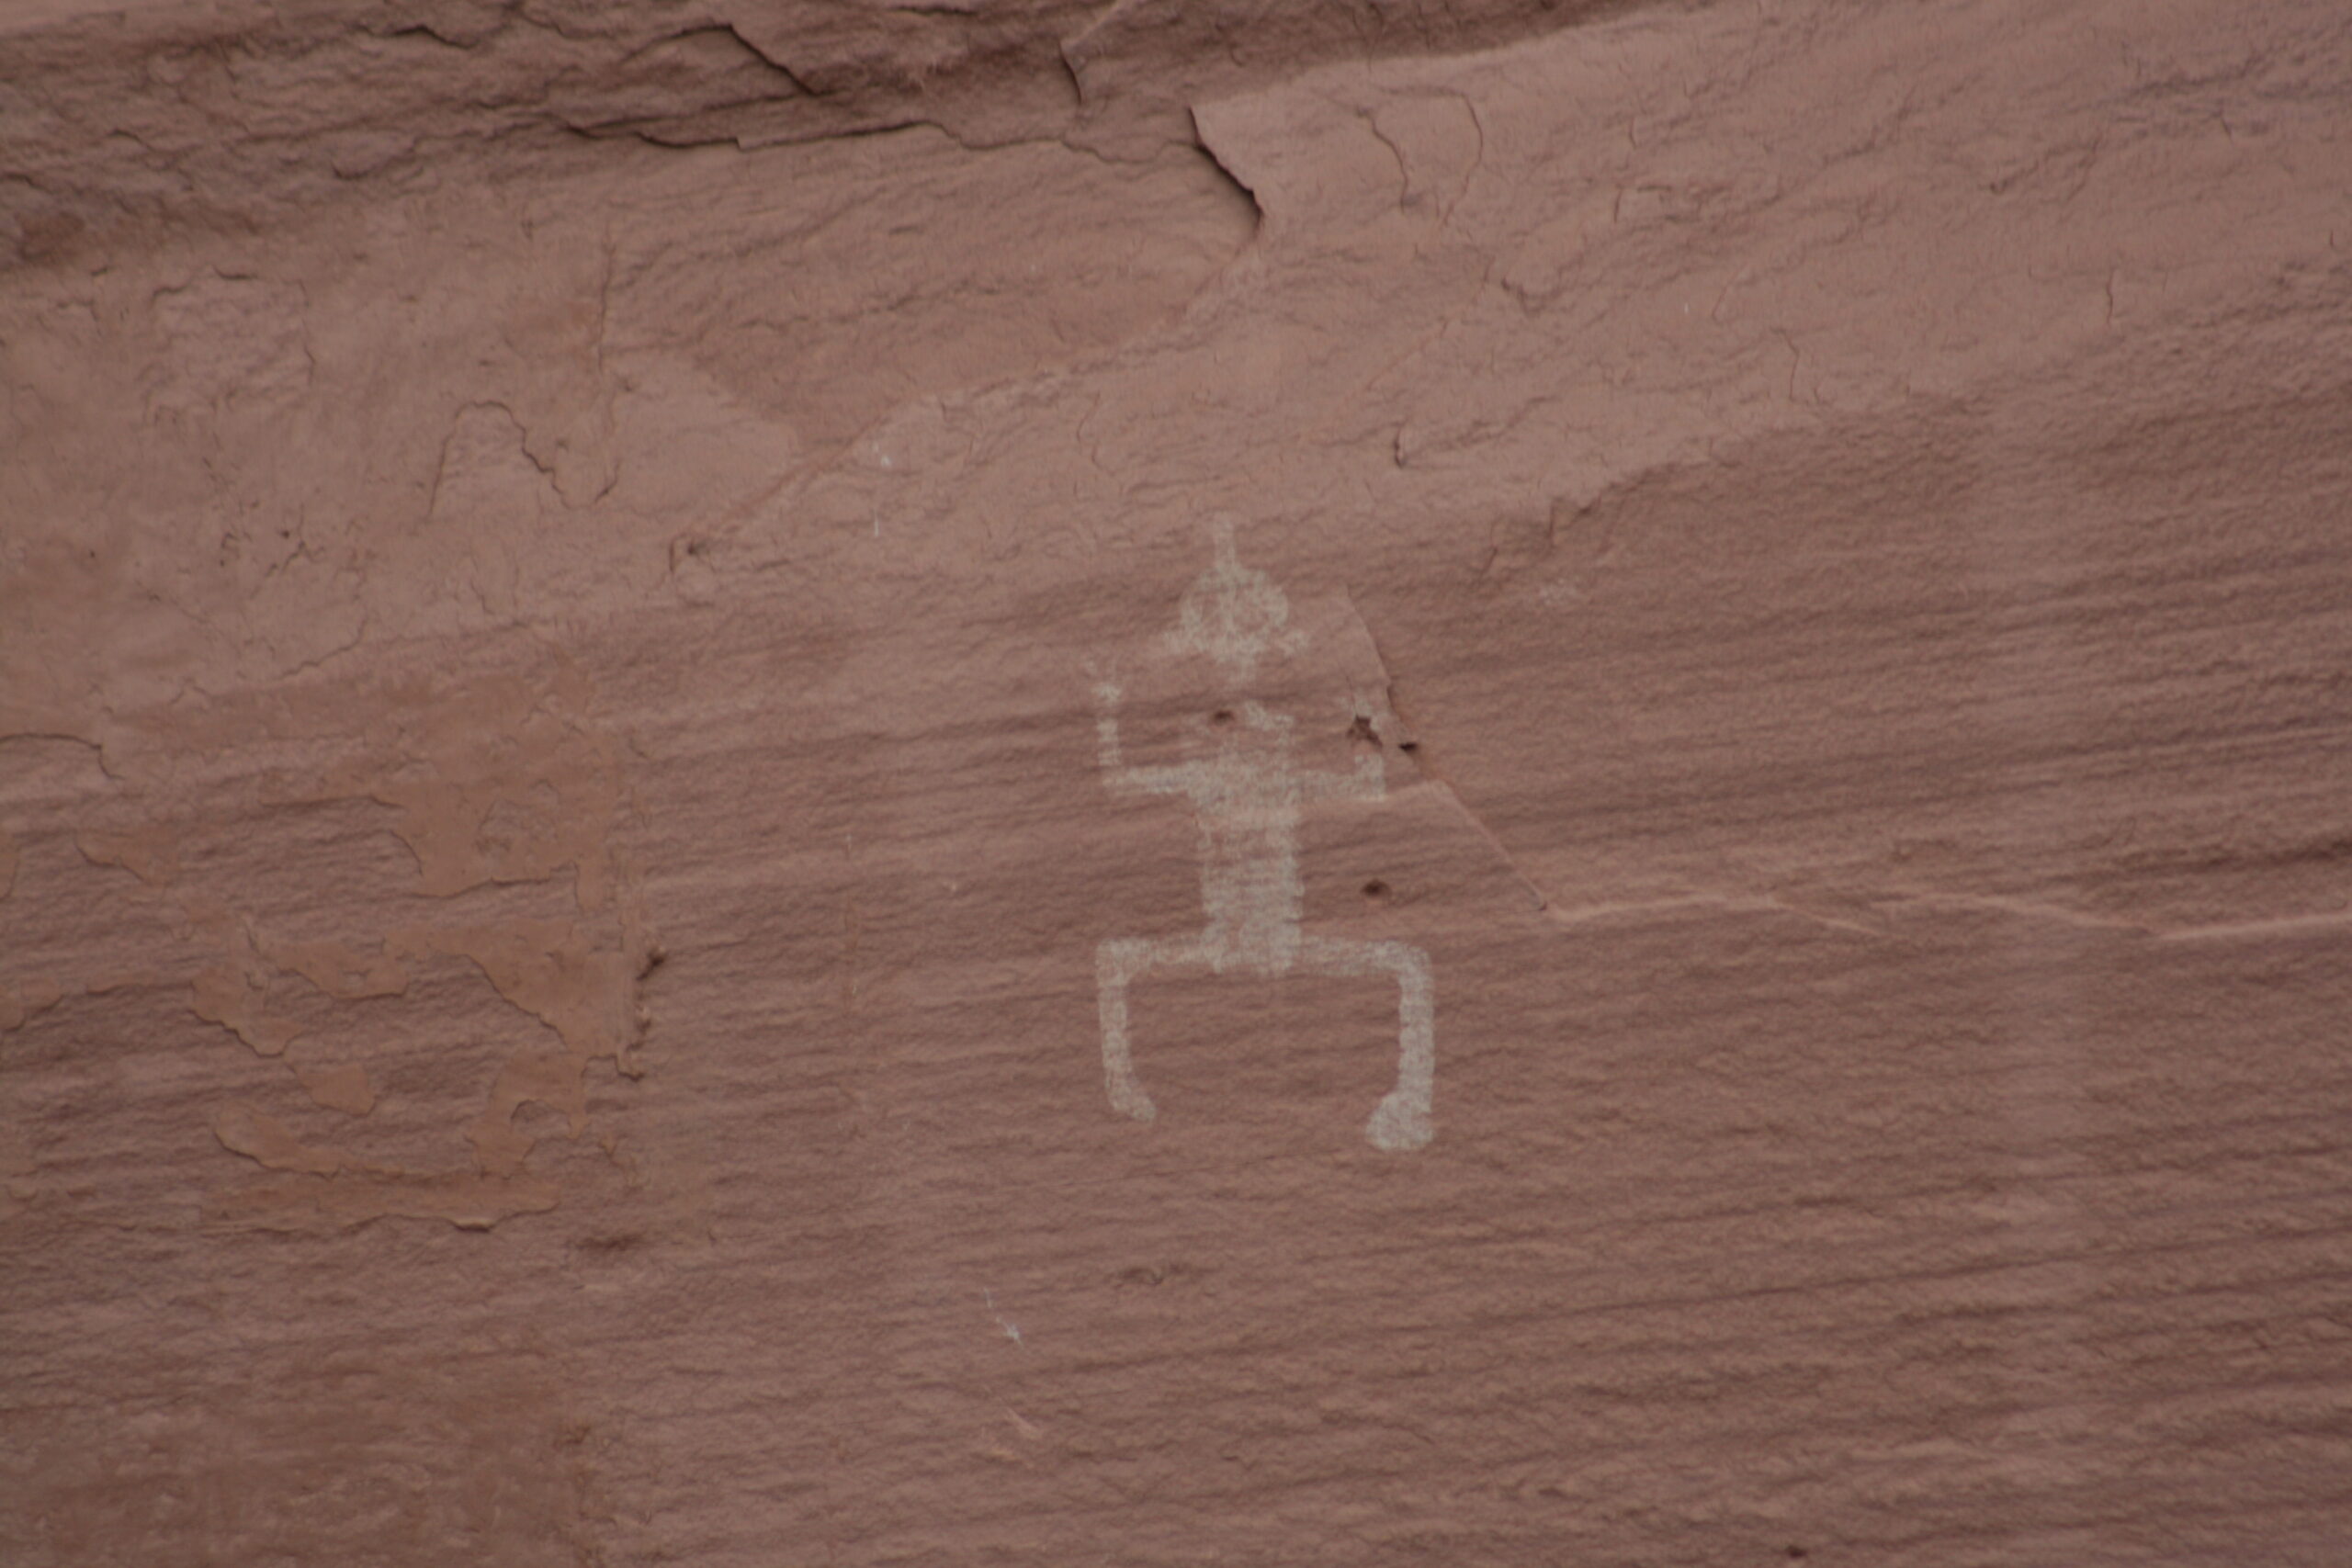 A pictograph appears on the White House Ruins in Canyon de Chelly.